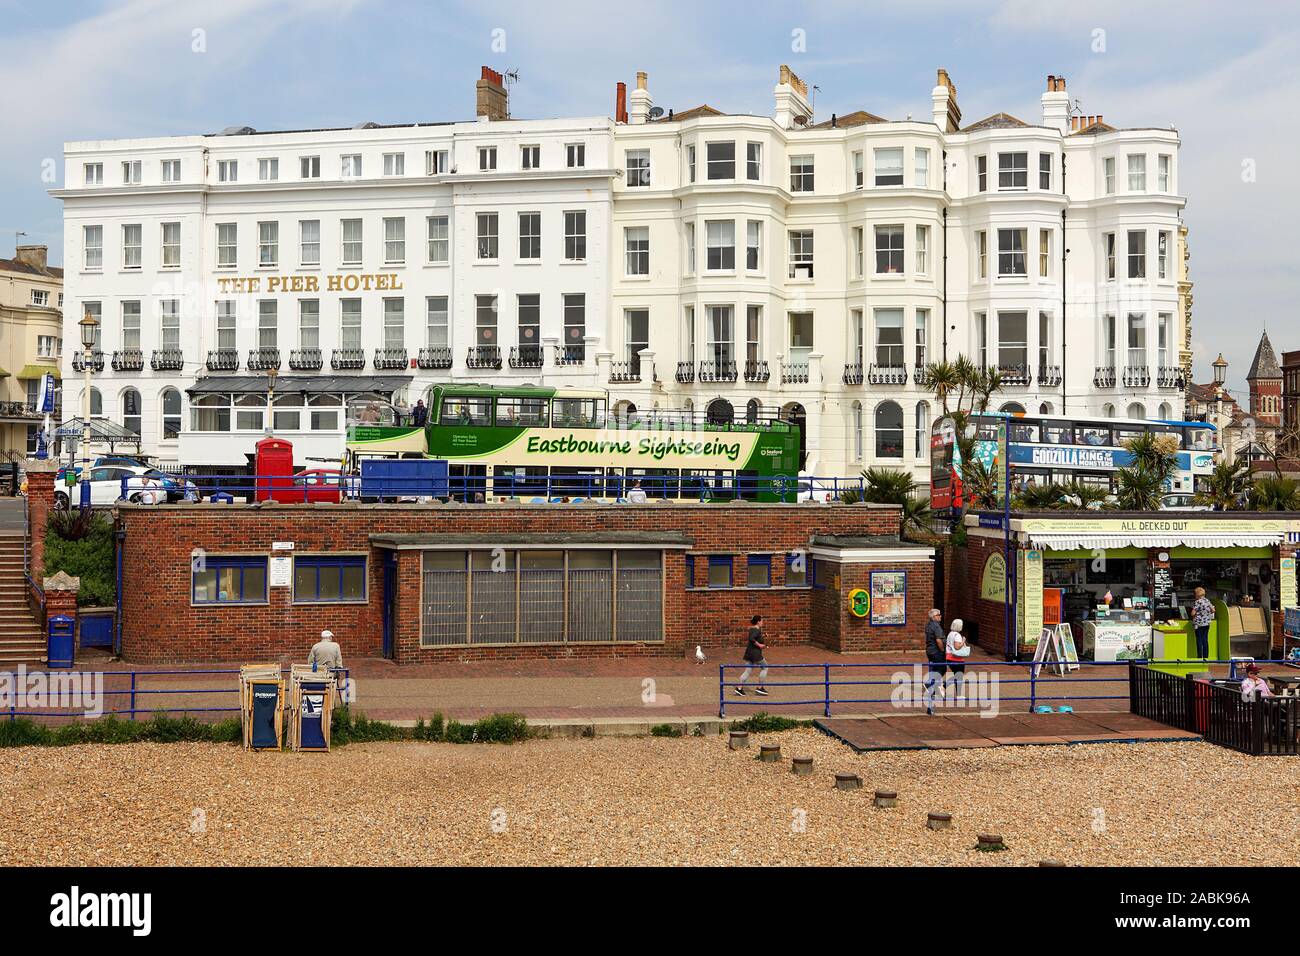 Viewed here in May 2019 is The Pier Hotel in Eastbourne along with accompanying tourist buses and visitors. Stock Photo